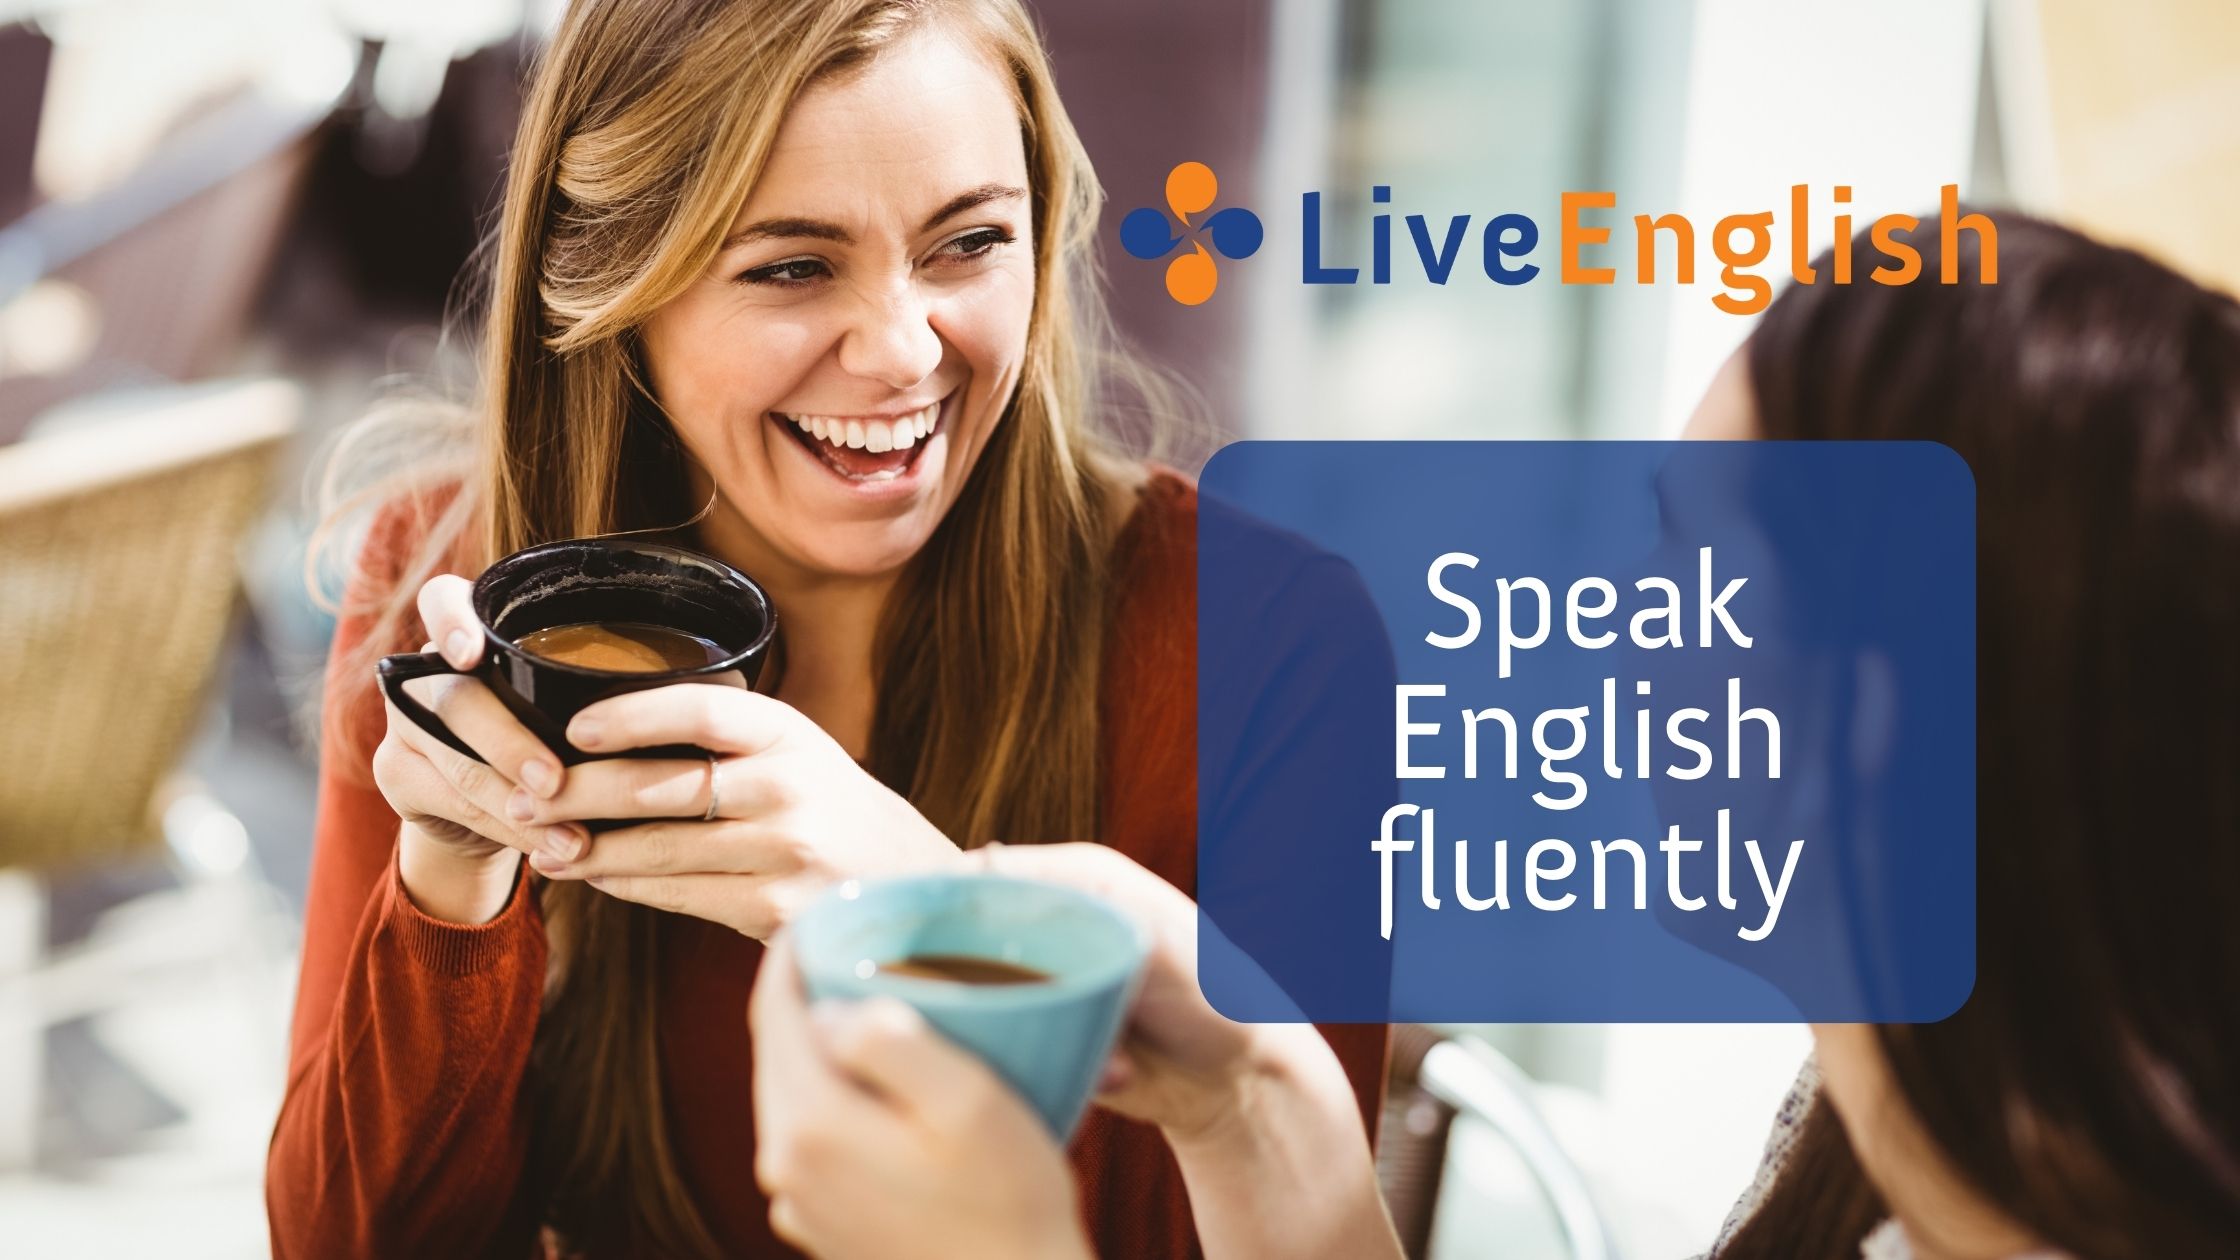 Learn how to speak English fluently - Live-English.net